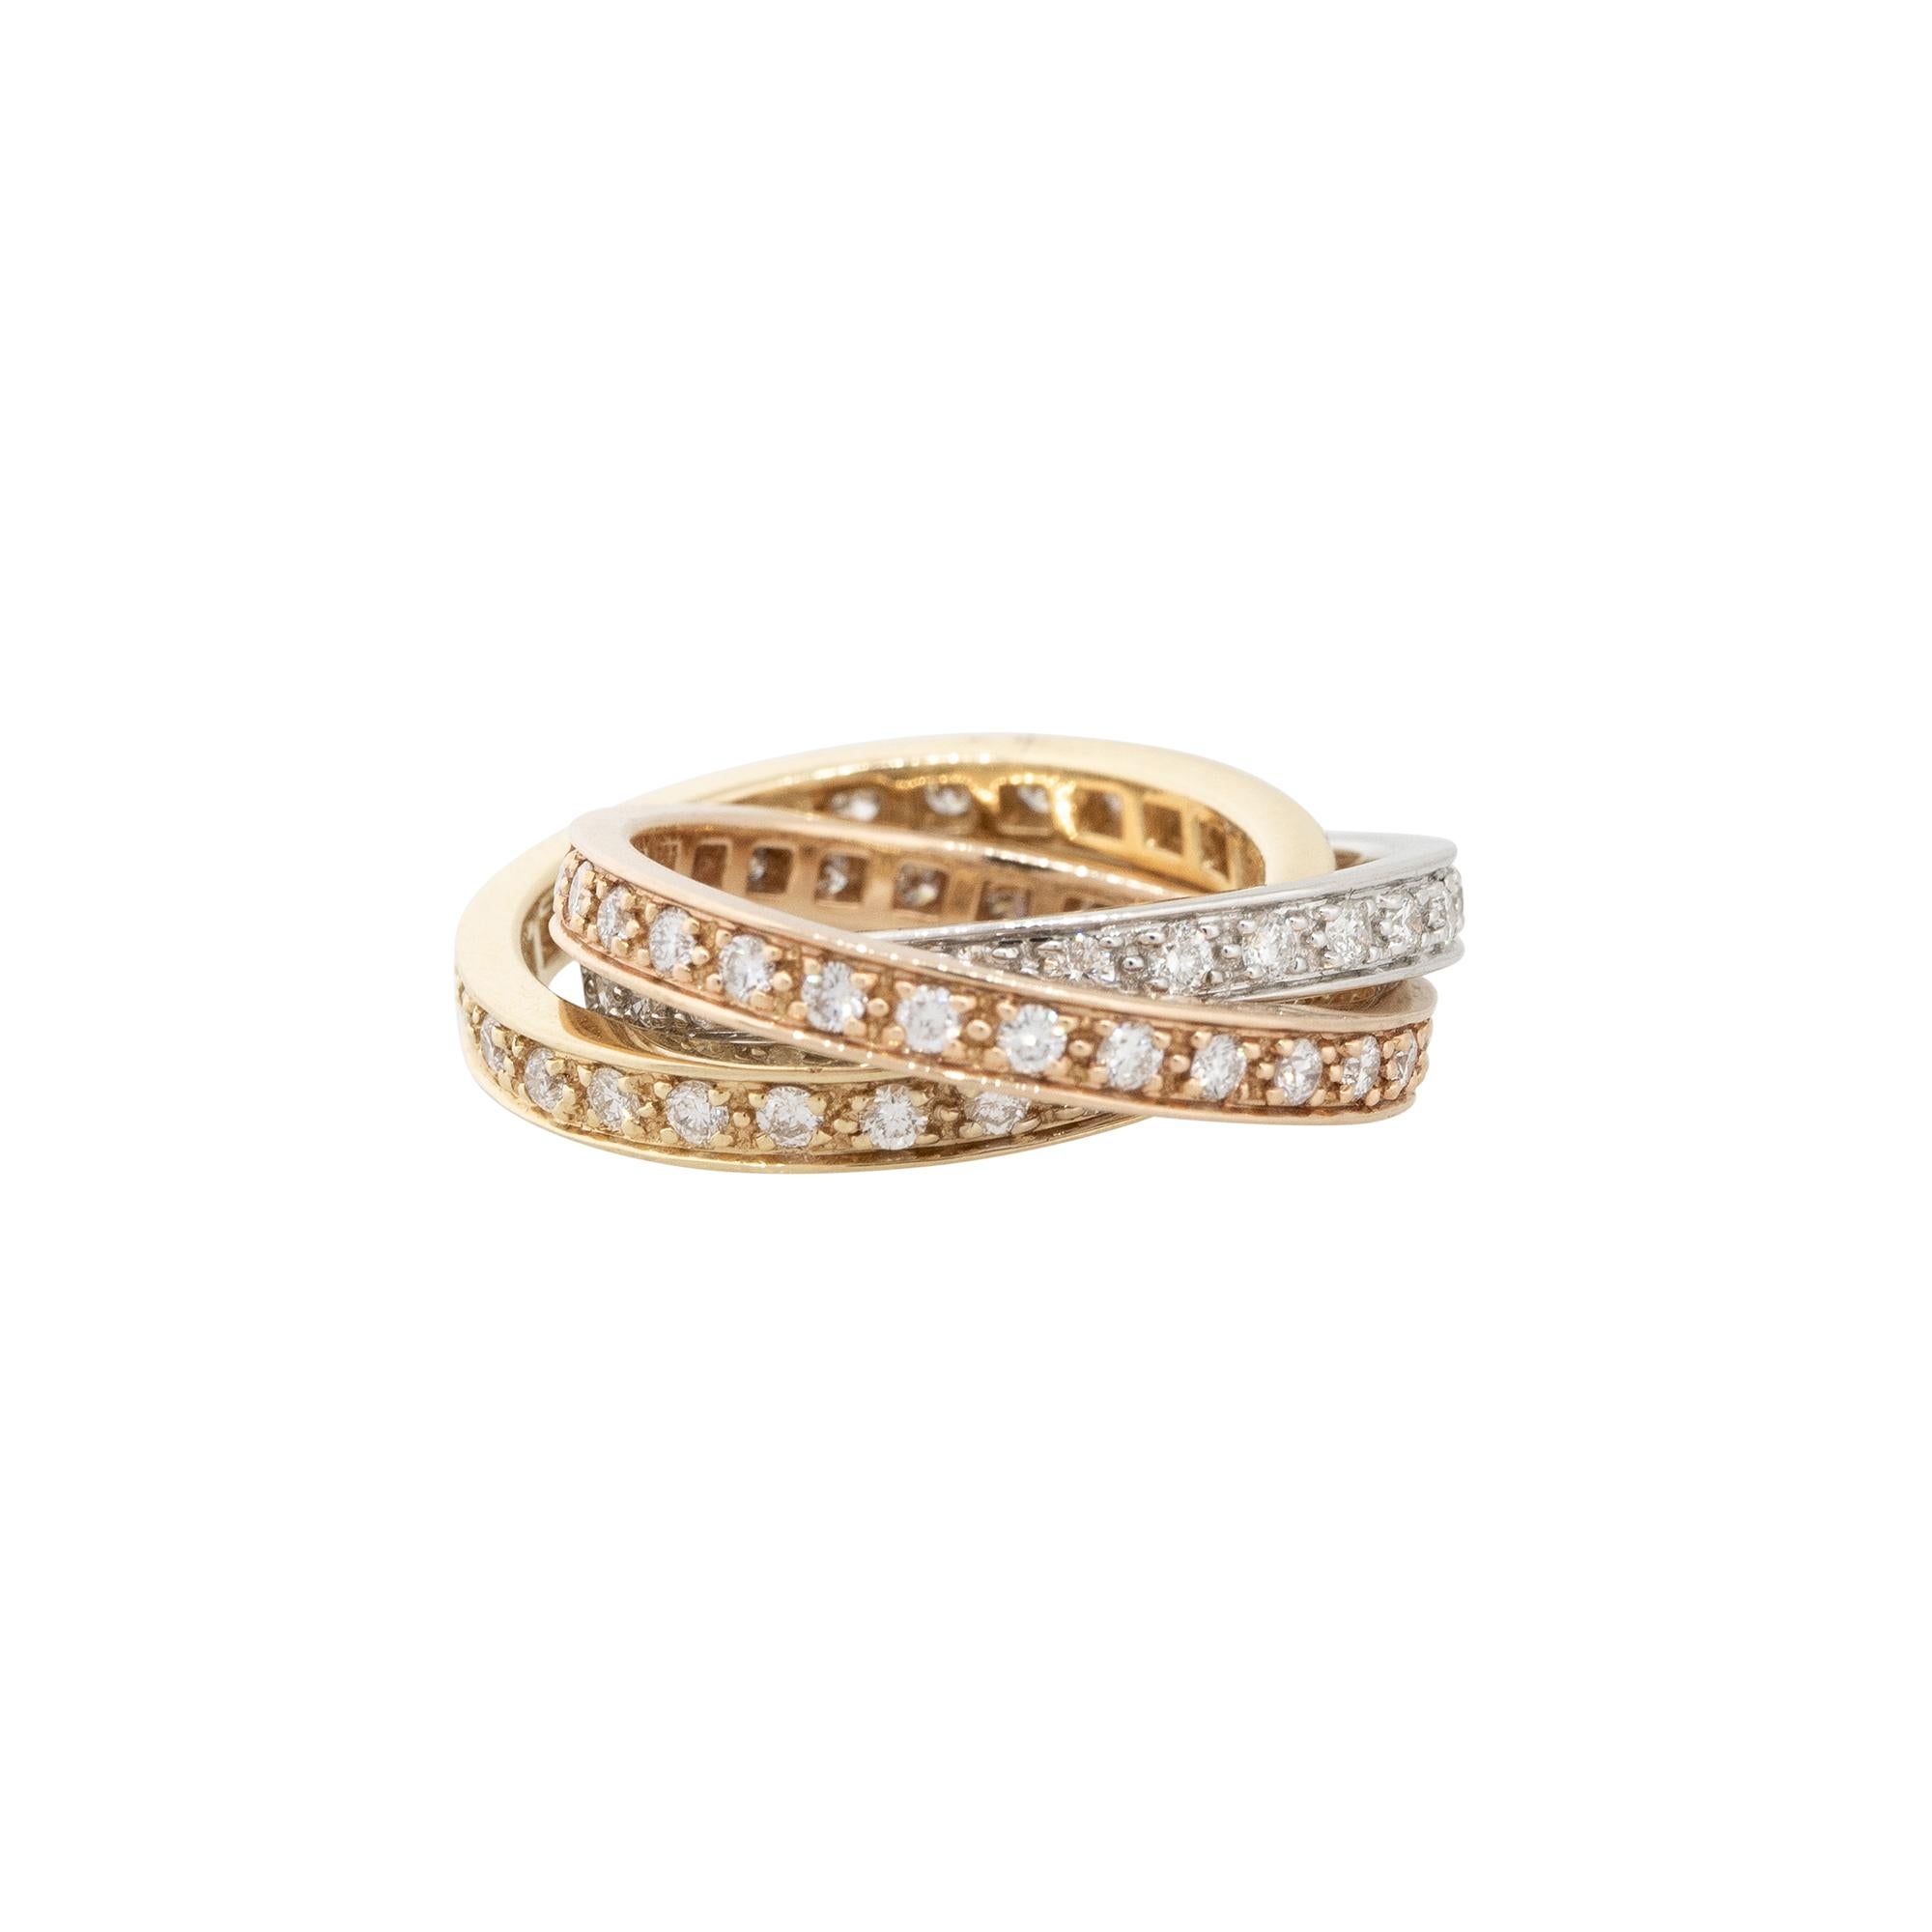 18k Multi-Tone Gold 1.88ctw Diamond Intertwined Ring
Style: Women's Diamond Intertwined Ring
Material: 18k White, Yellow, and Rose Gold
Diamond Details: Approximately 1.88ctw of Round Brilliant cut Diamonds. The 3 rings are intertwined (1 Rose Gold,